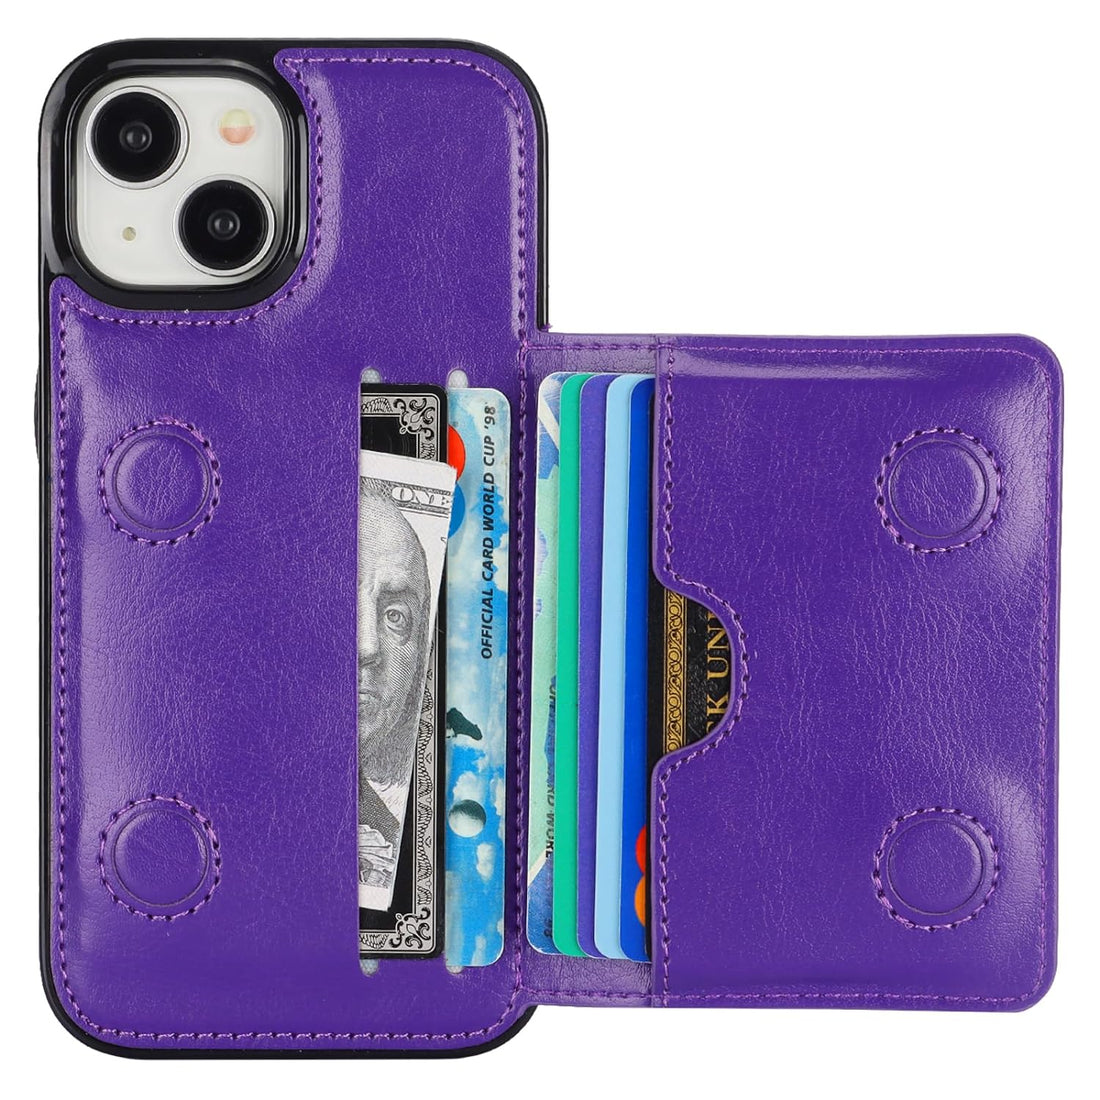 KIHUWEY Compatible with iPhone 15 Wallet Case Credit Card Holder, Premium Leather Kickstand Flip Hidden Magnetic Clasp Durable Shockproof Protective Cover for iPhone 15 6.1 inch (Dark Purple)